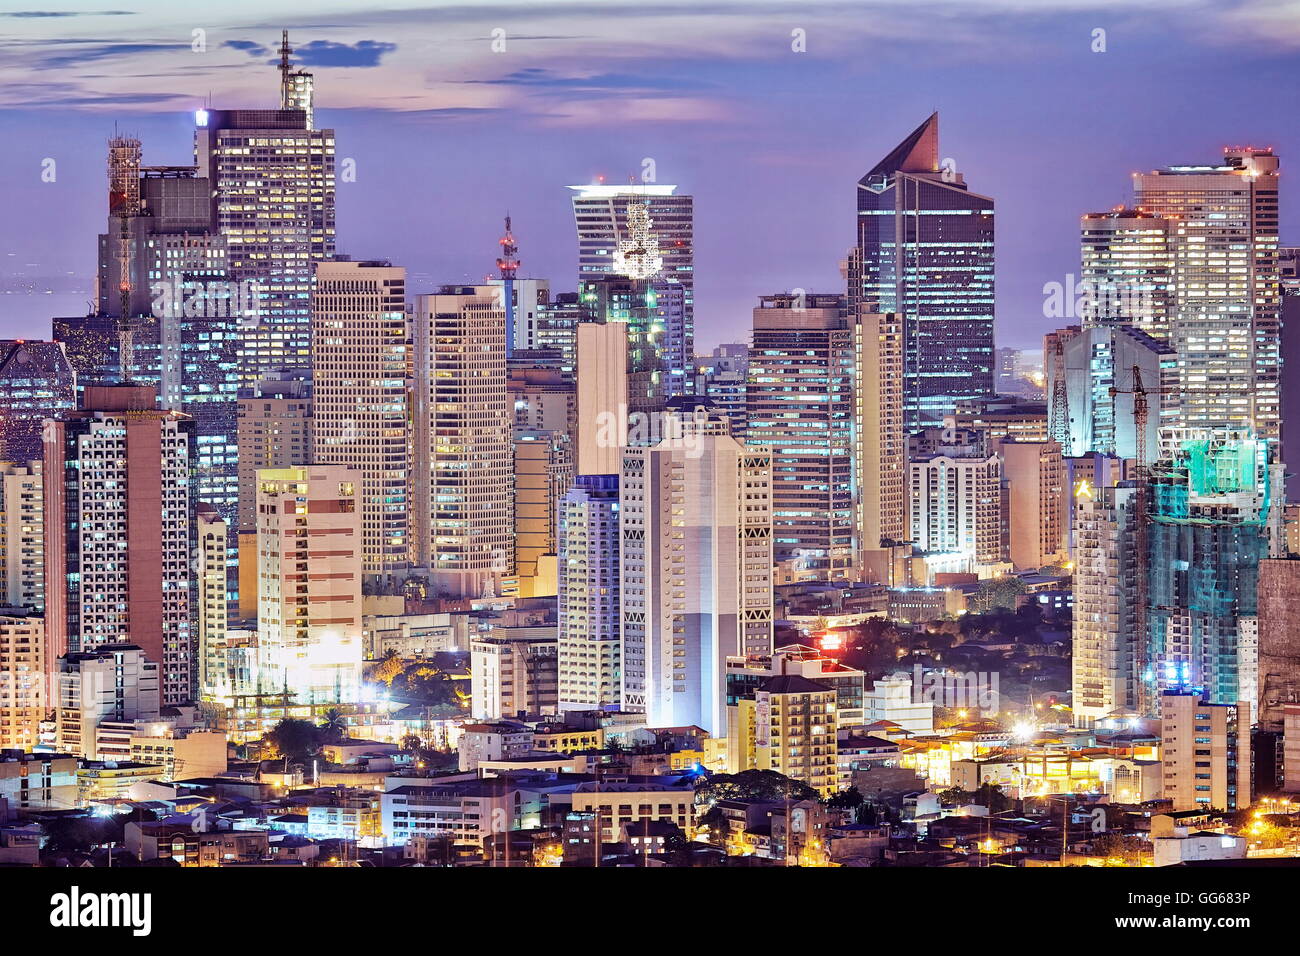 Philippines, Luzon, Manila. Makati business district with Louis Vuitton  advertising board and a rainbow over the city skyline Stock Photo - Alamy